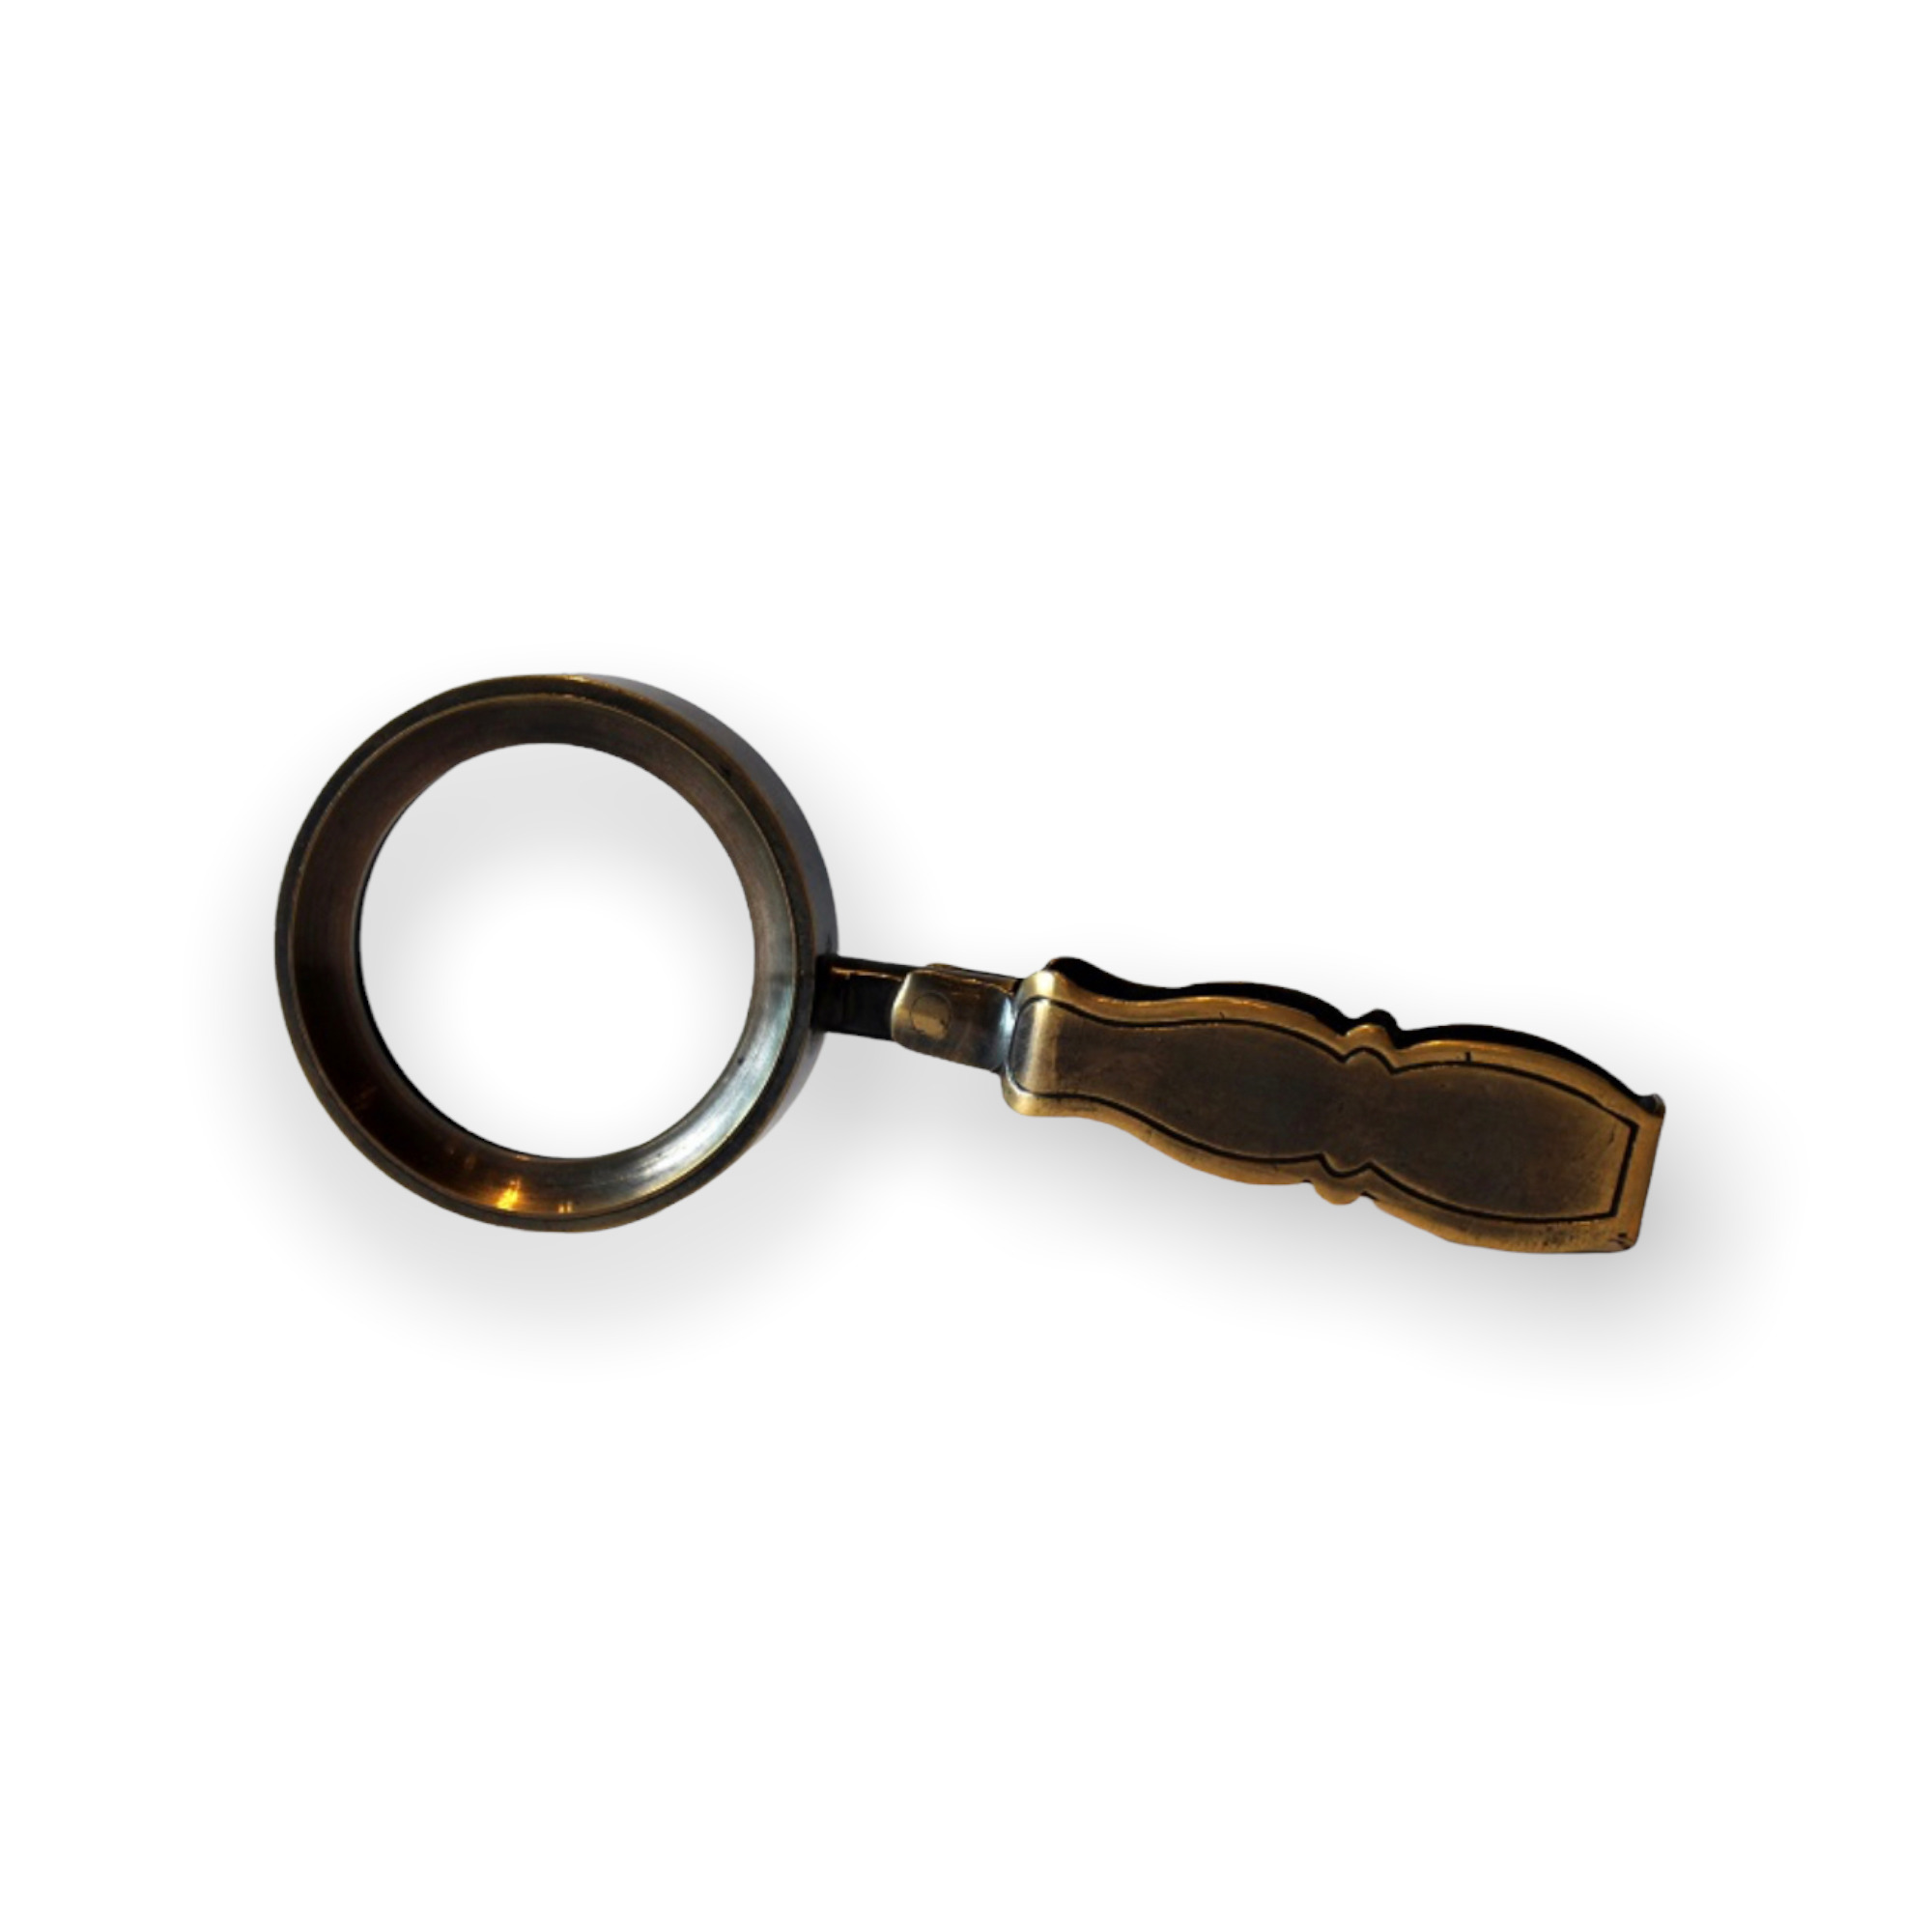 Magnifying Necklace - Vintage Nautical Pocket Style Monocle Magnifier